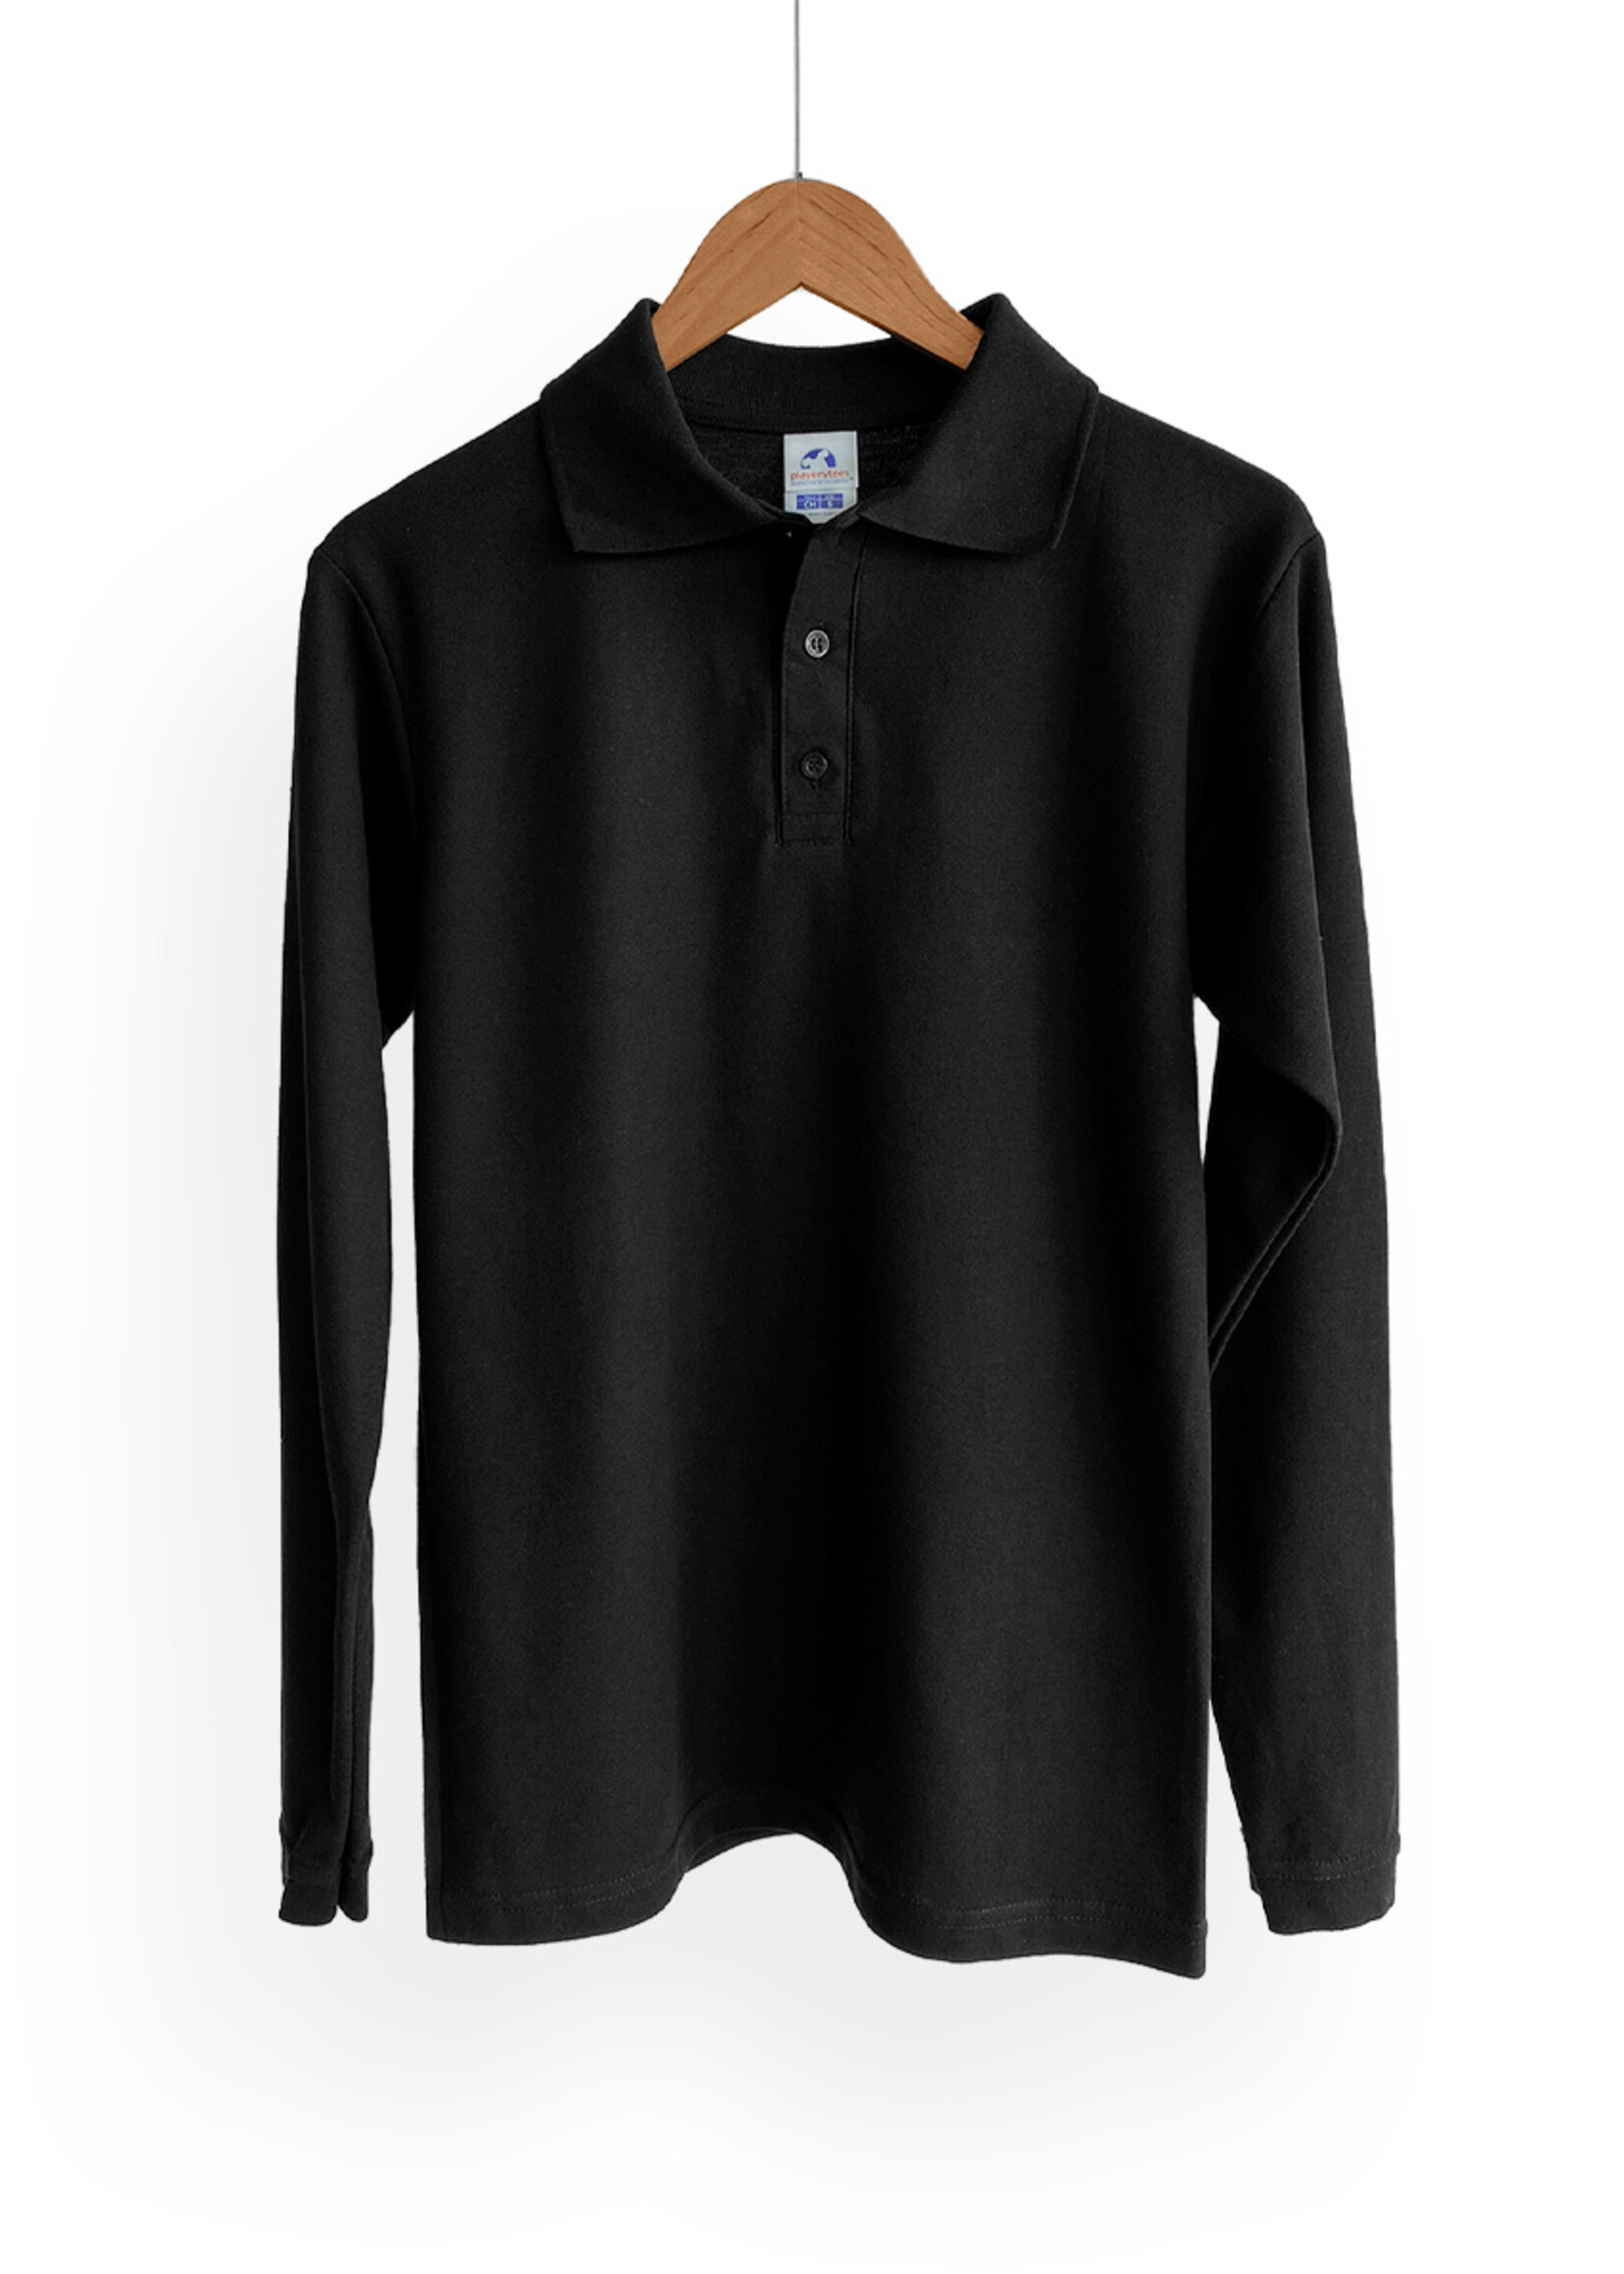 Playerytees STYLE 600CL - CARDED POLO LONG SLEEVE 50% COTTON 50% POLYESTER